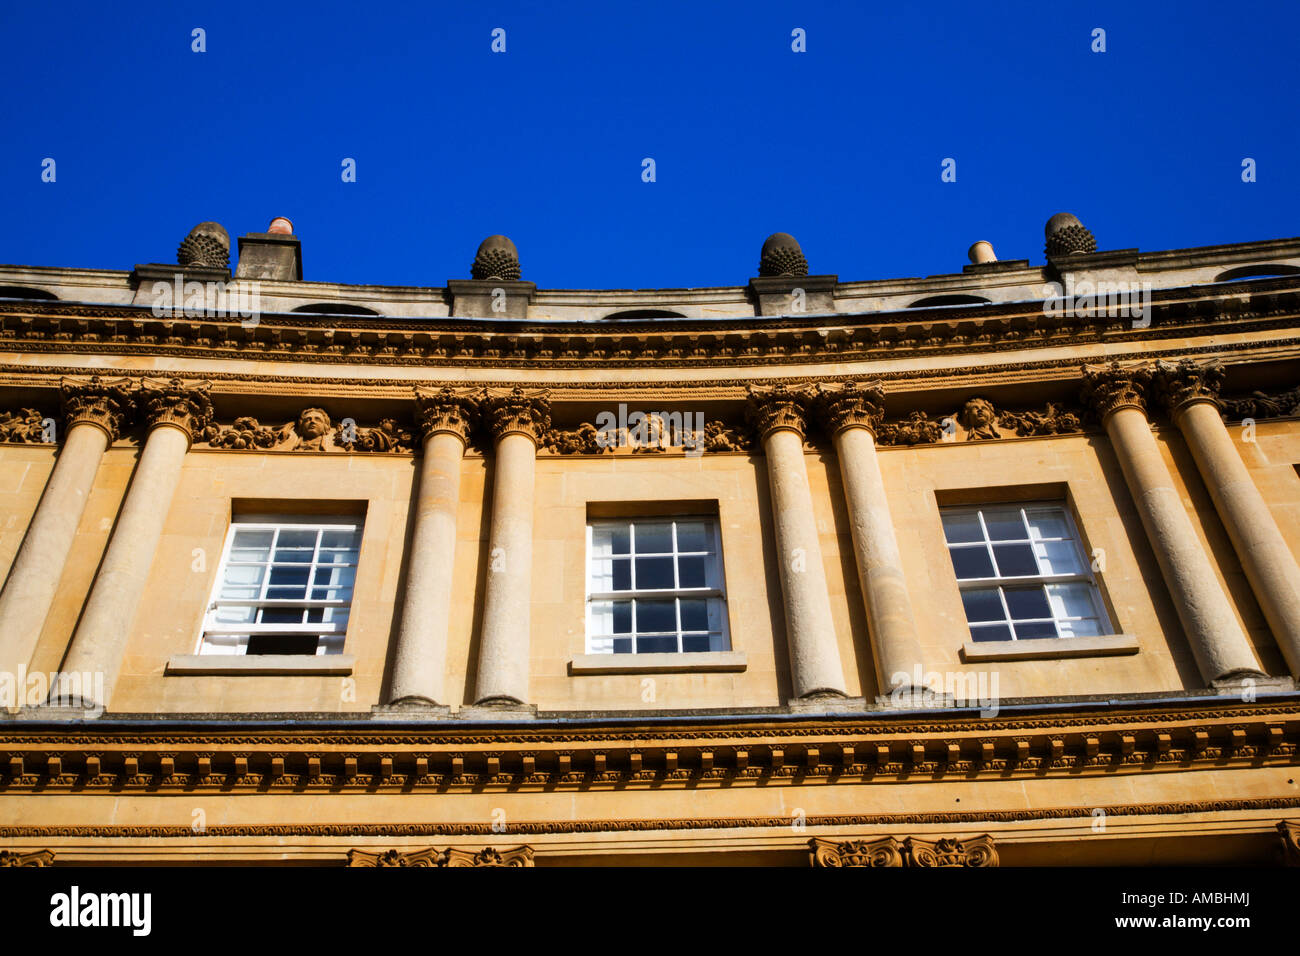 The Circus a Grade I listed circle of townhouses by architect John Wood in Bath Somerset England Stock Photo